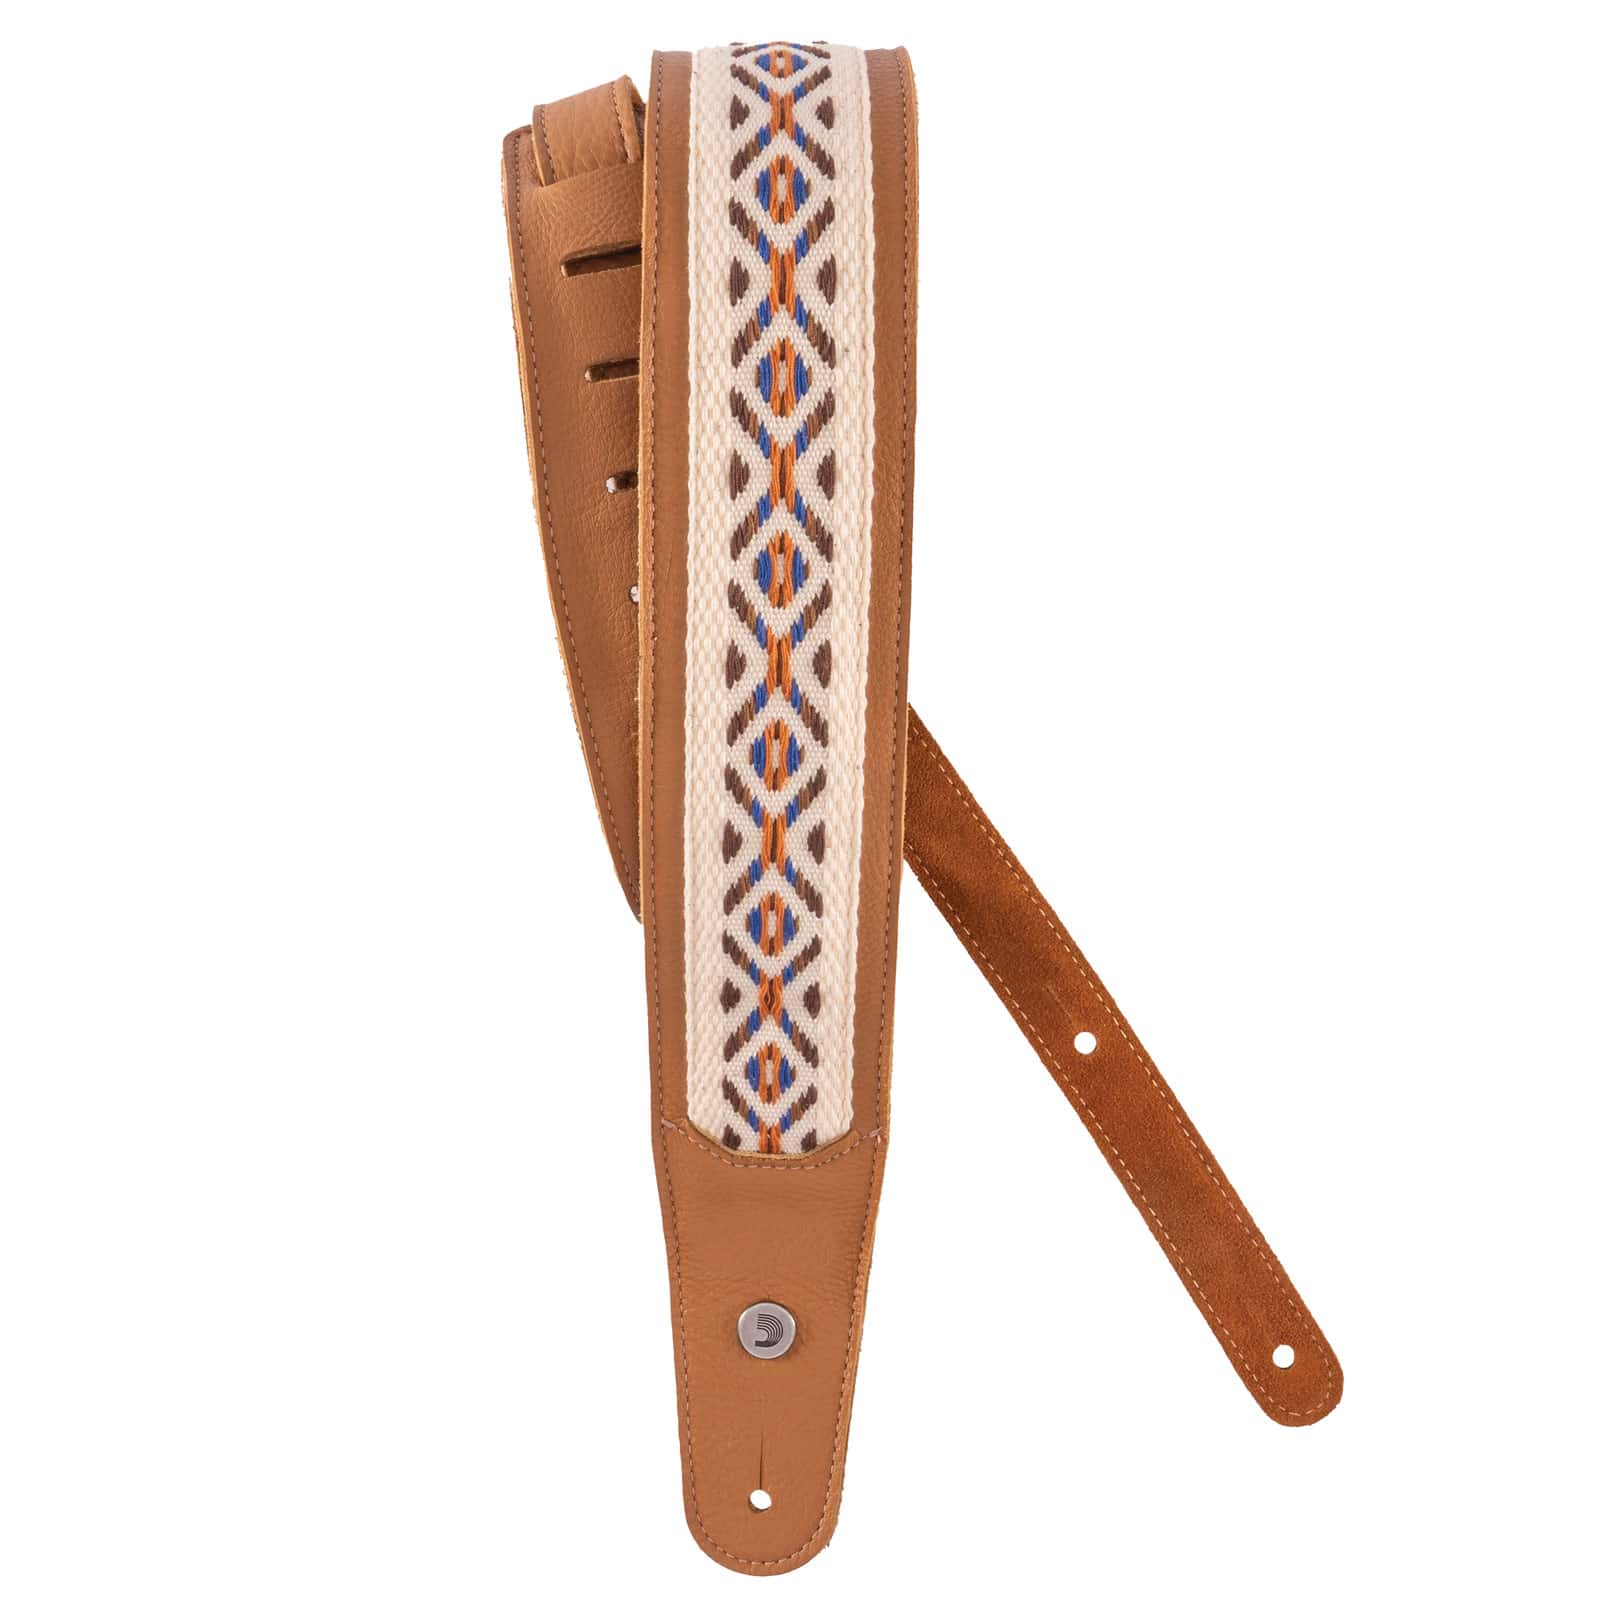 D'ADDARIO AND CO HYBRID LEATHER GUITAR STRAP, DESERT